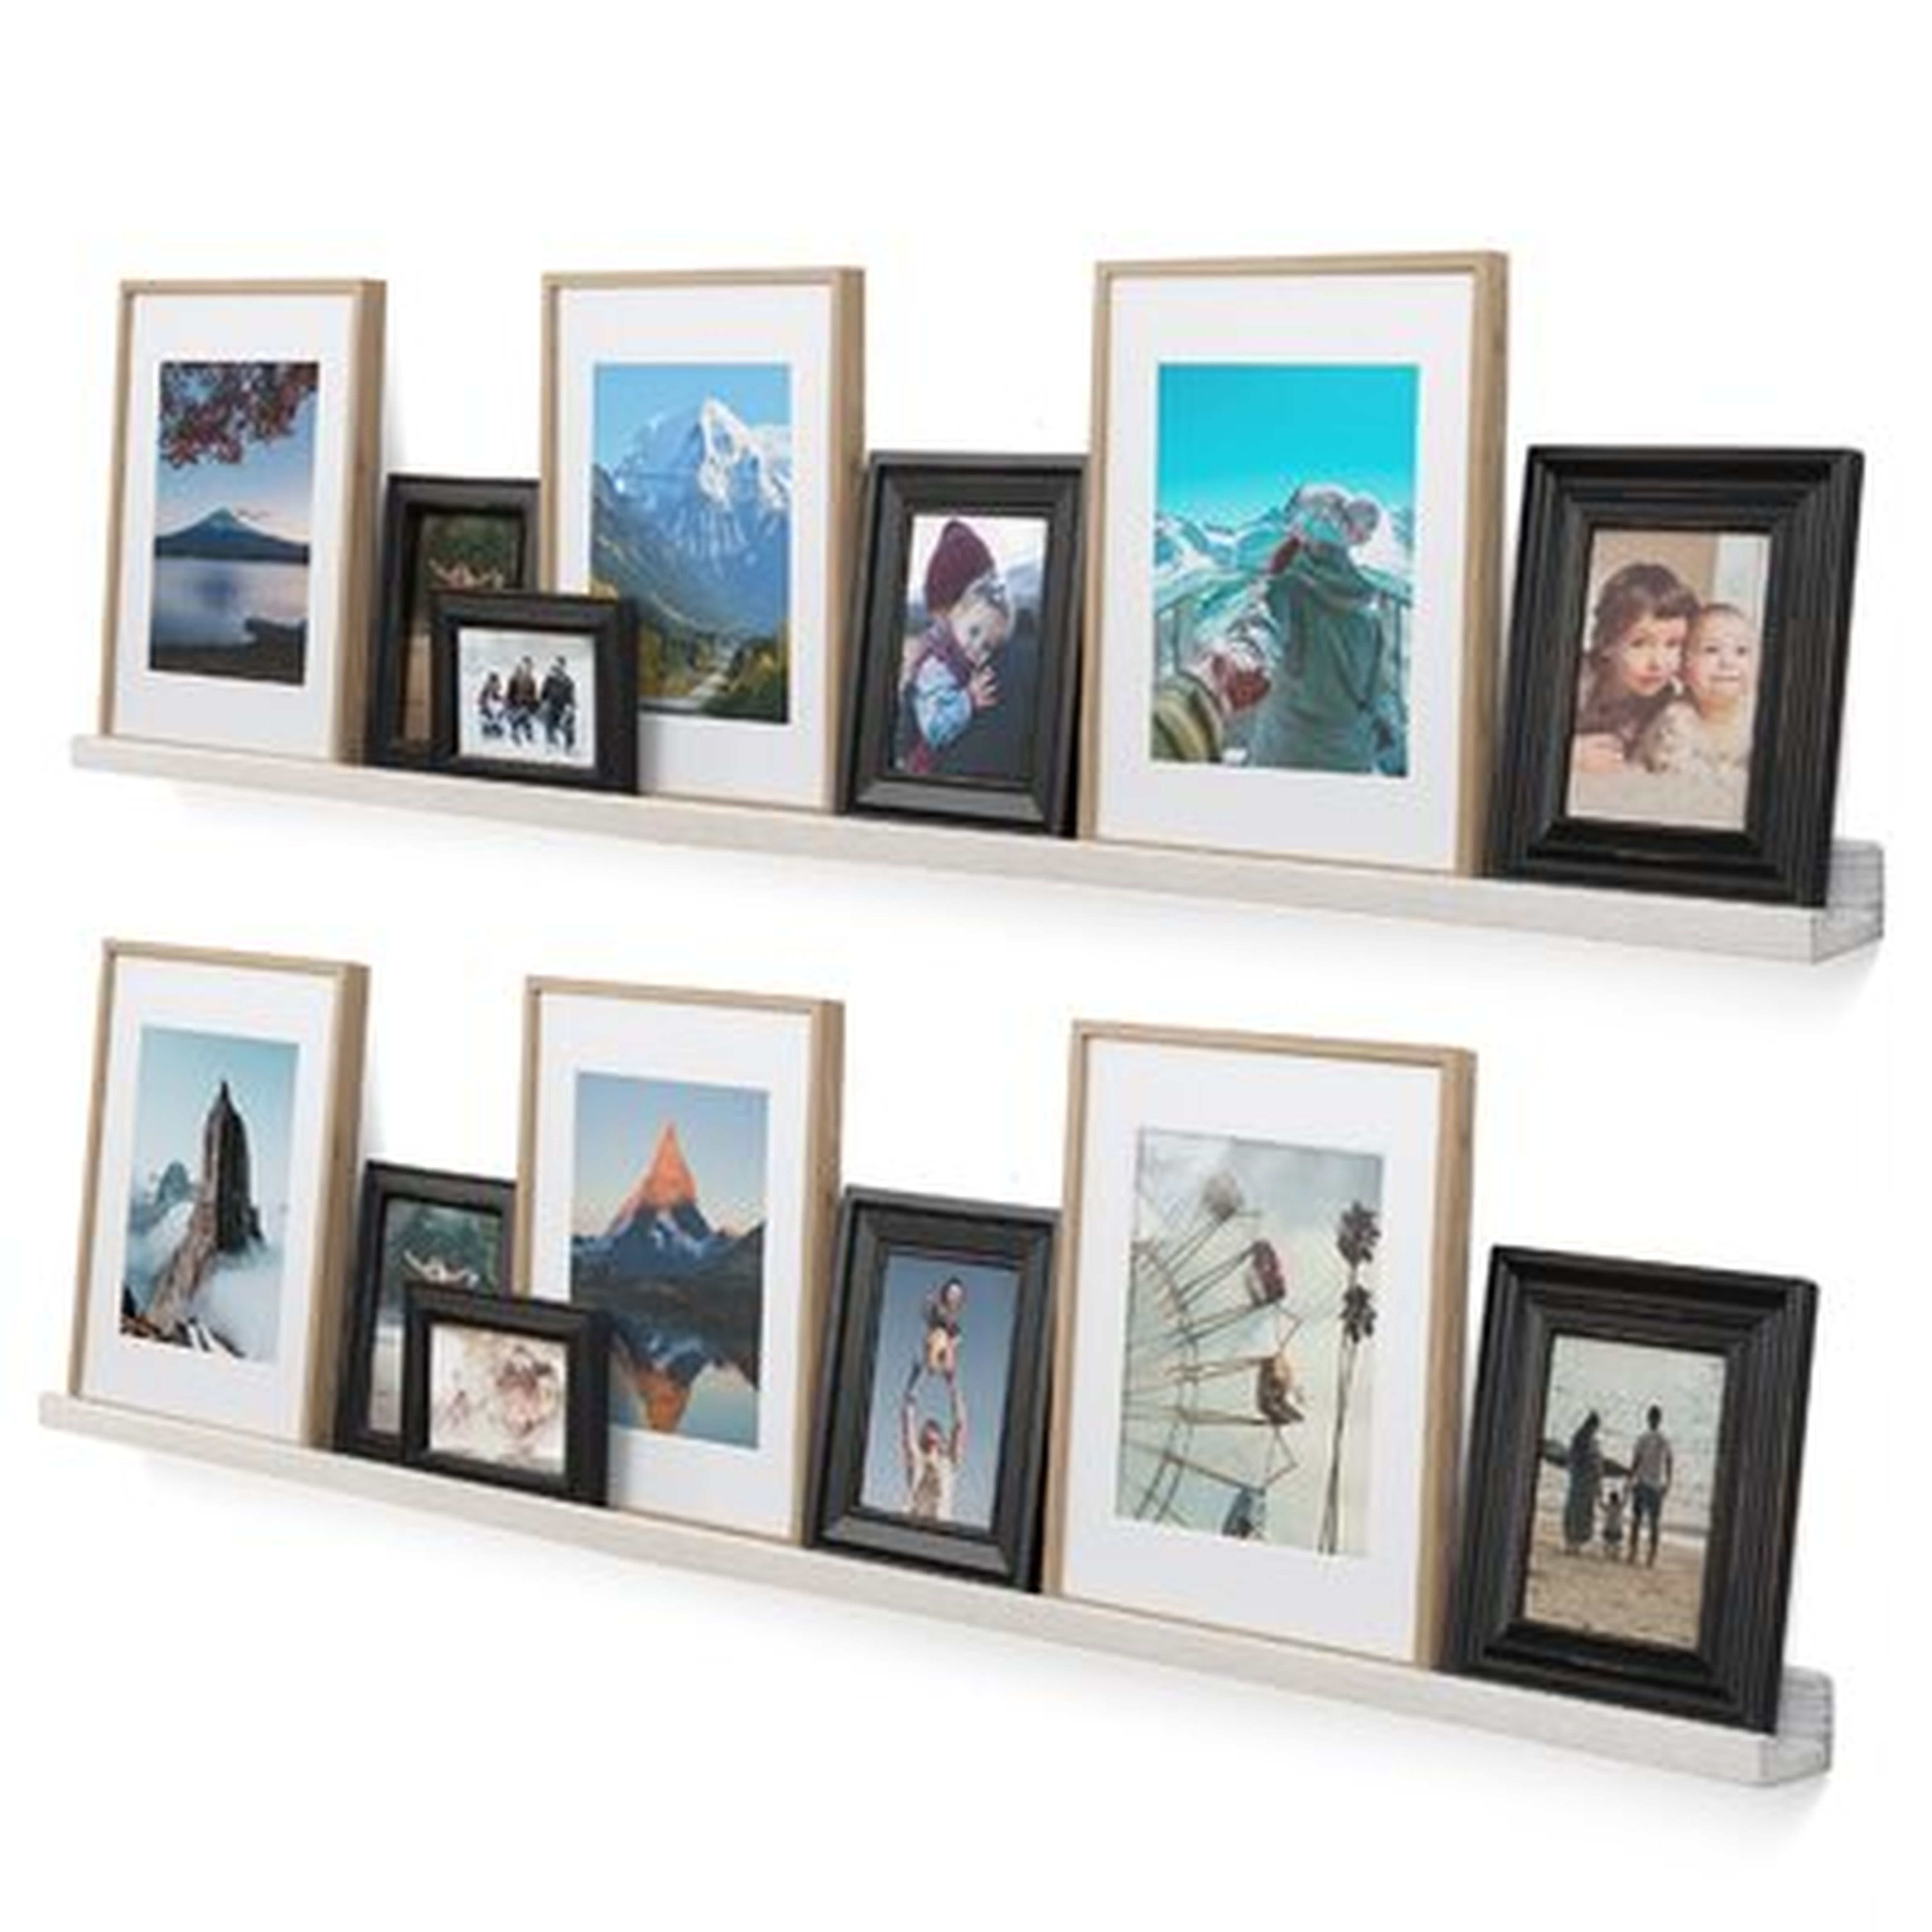 Brucknell Solid Wood Picture Ledge Wall Shelf - Wayfair